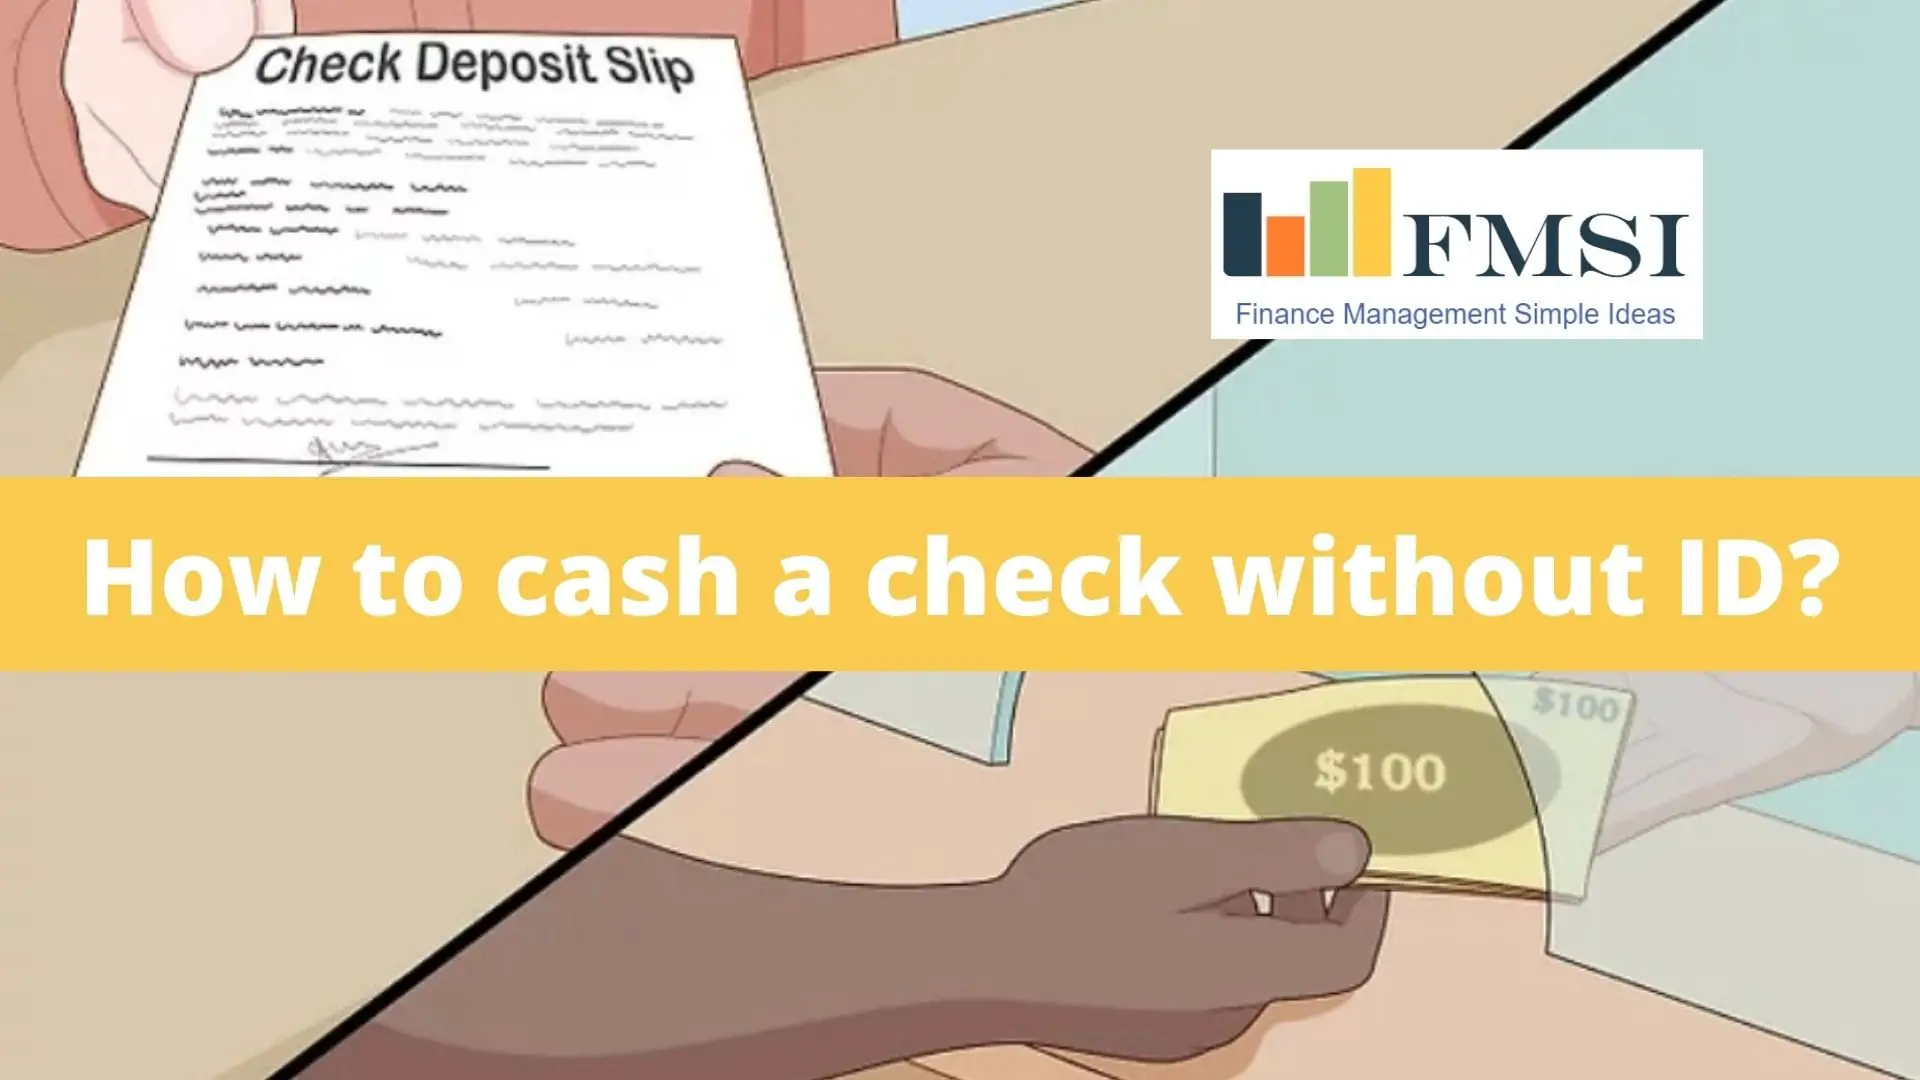 How to cash a check without ID